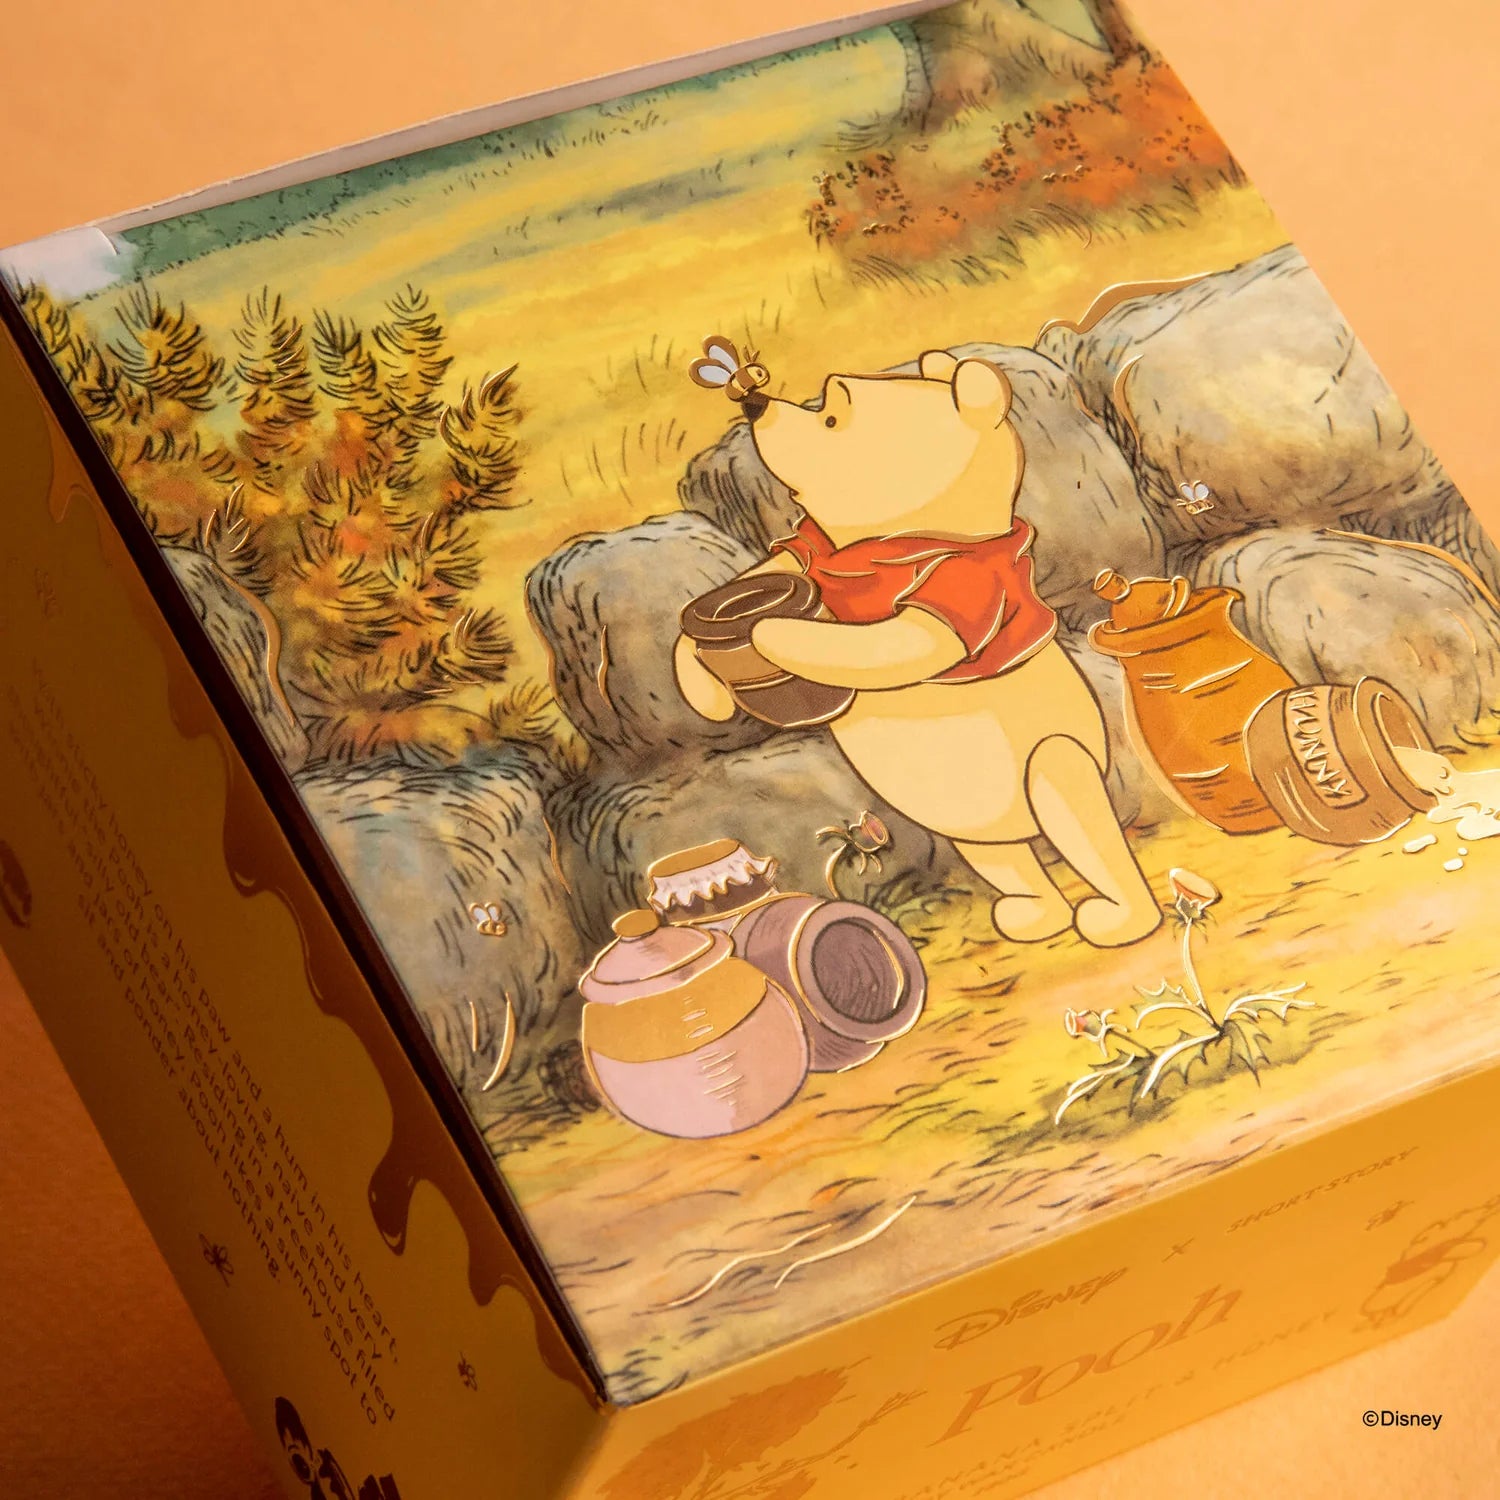 Short Story - Disney Winnie The Pooh Candle